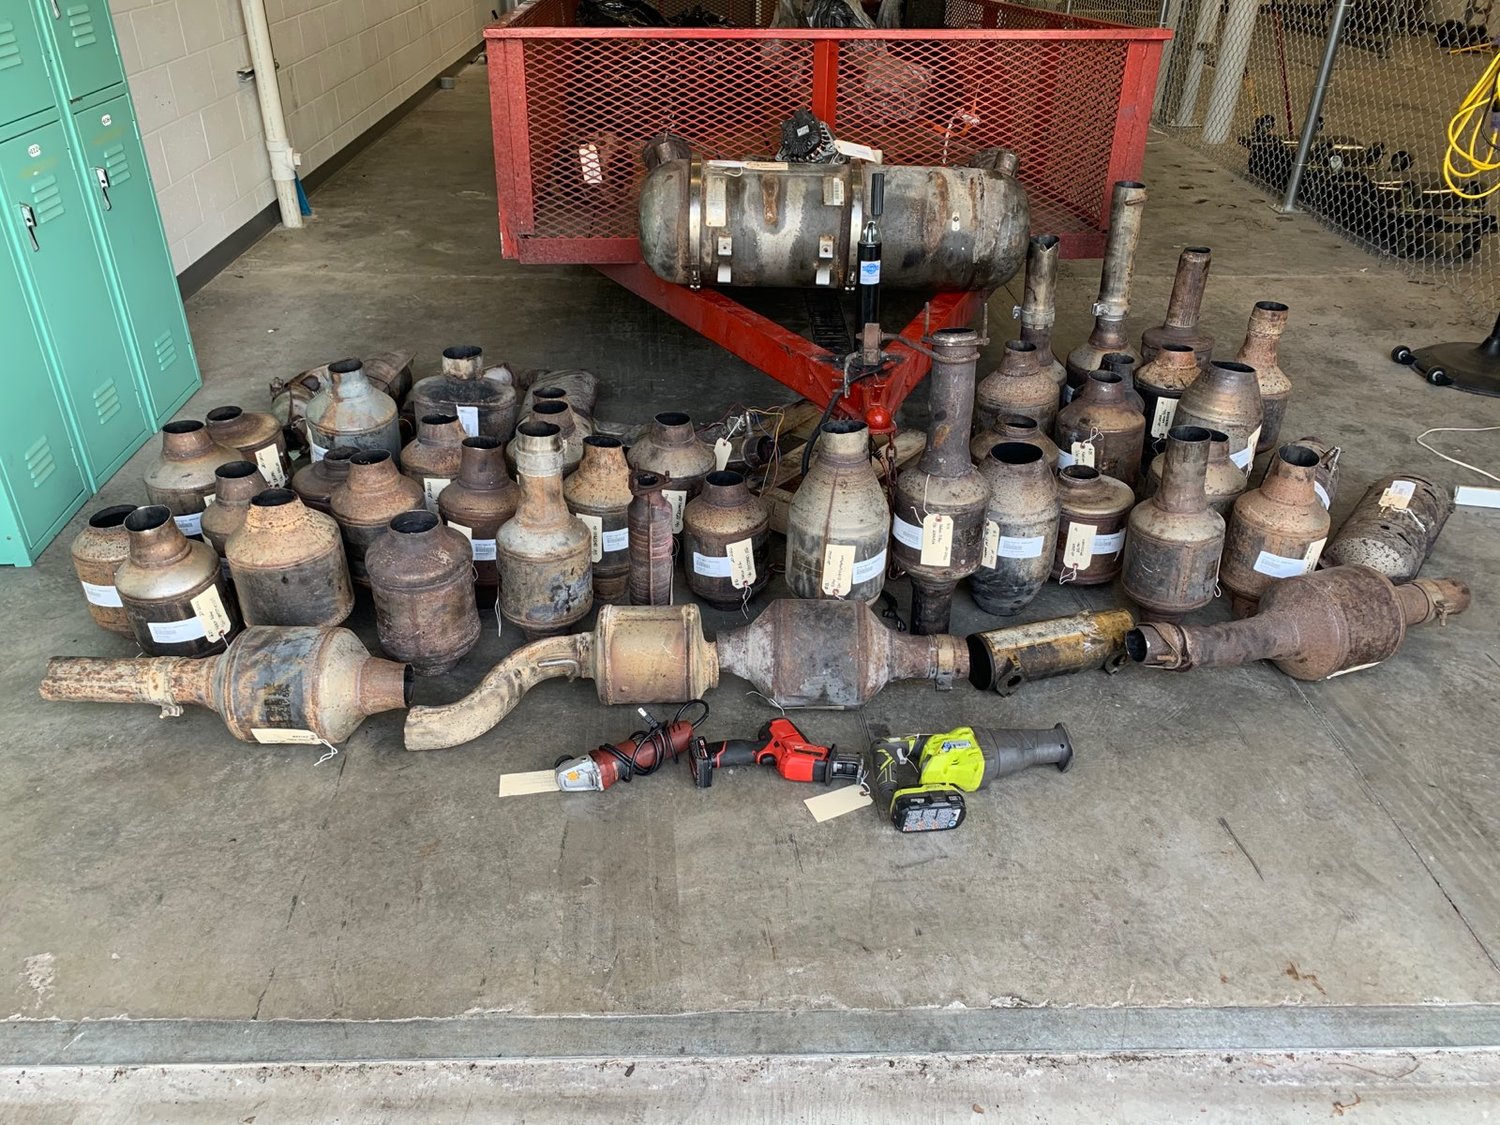 Catalytic converters and tools seized in the operation